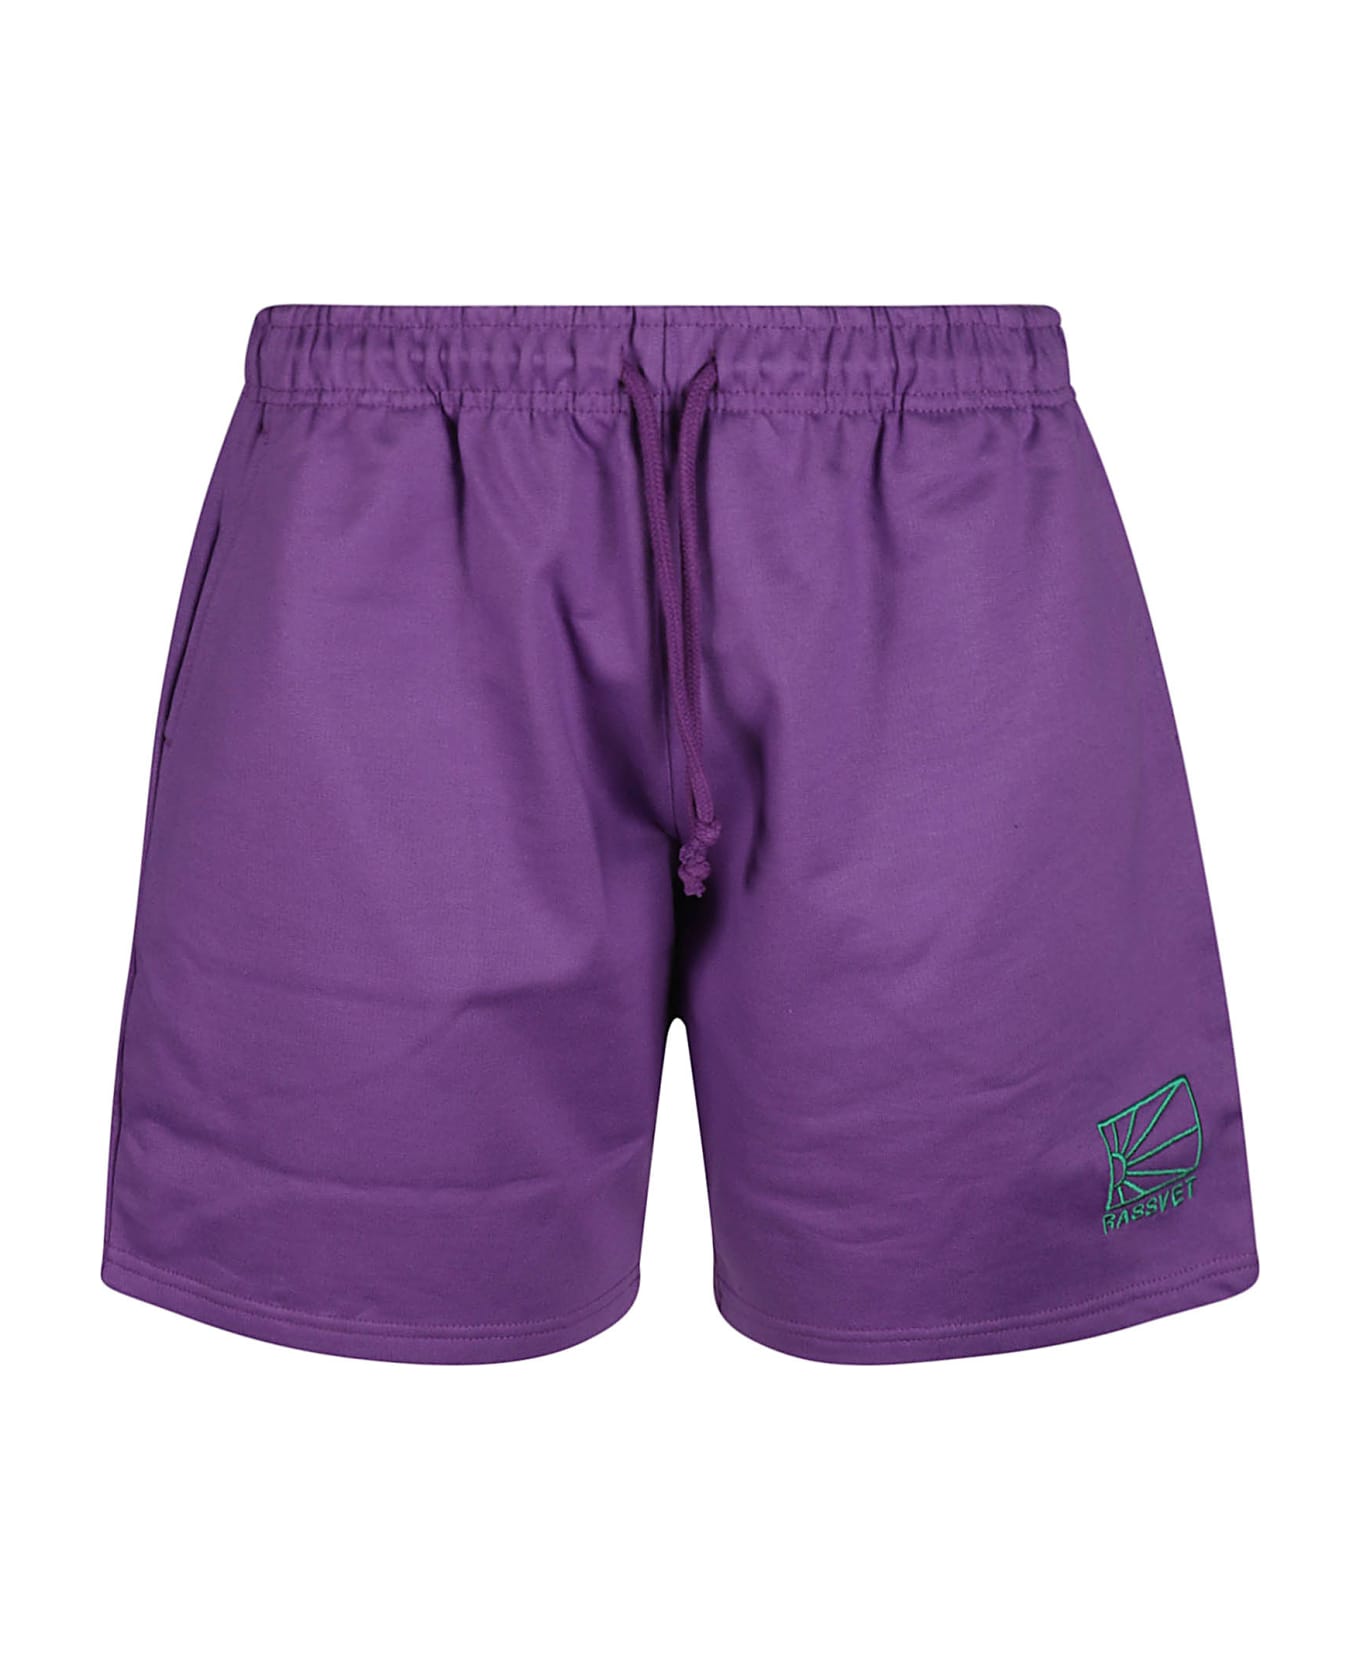 PACCBET Laced Shorts - Violet